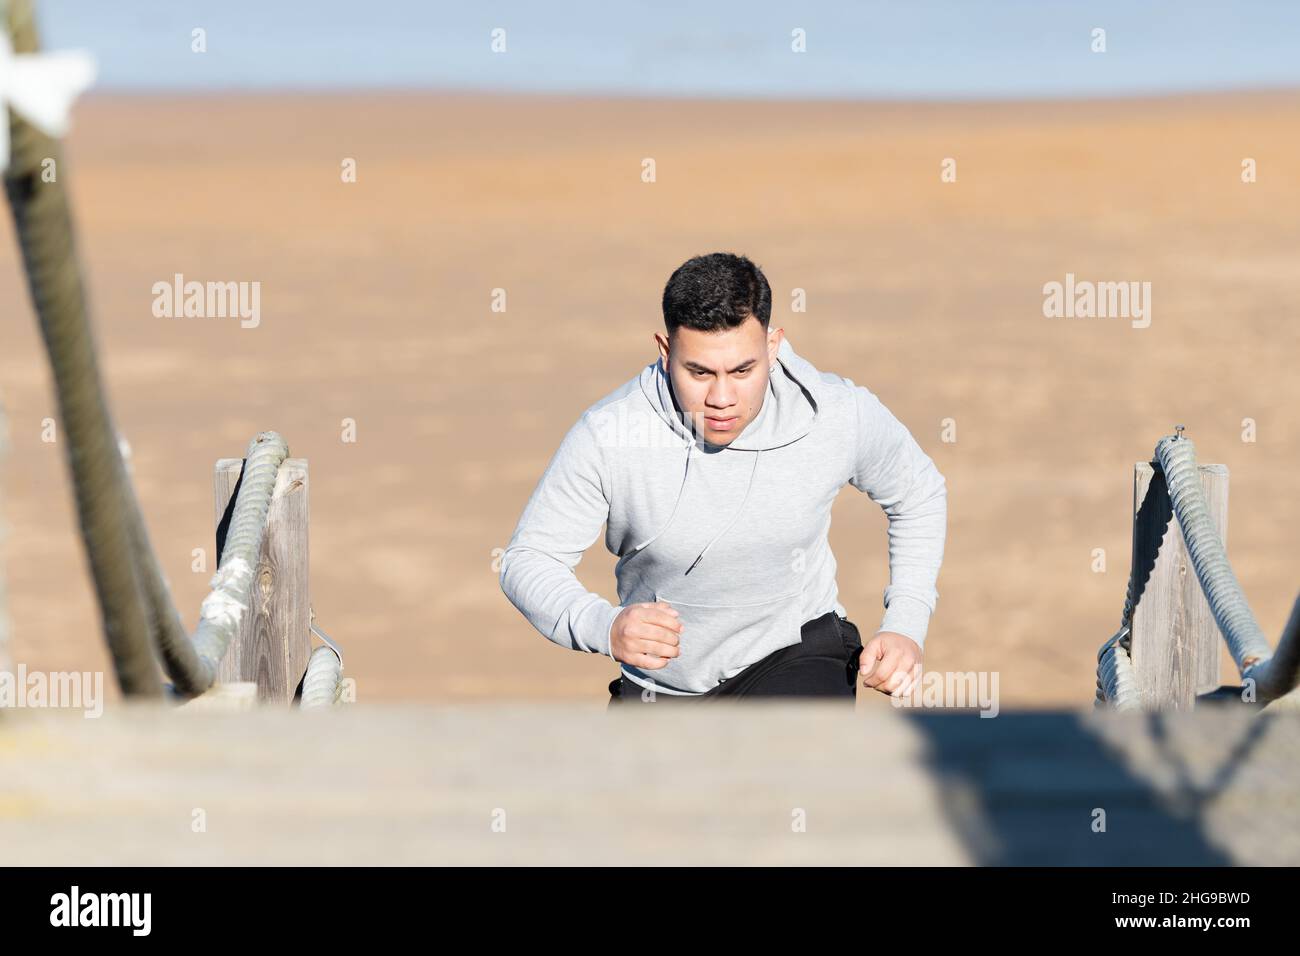 Latin sportsman training strength on a stairway at the beach Stock Photo